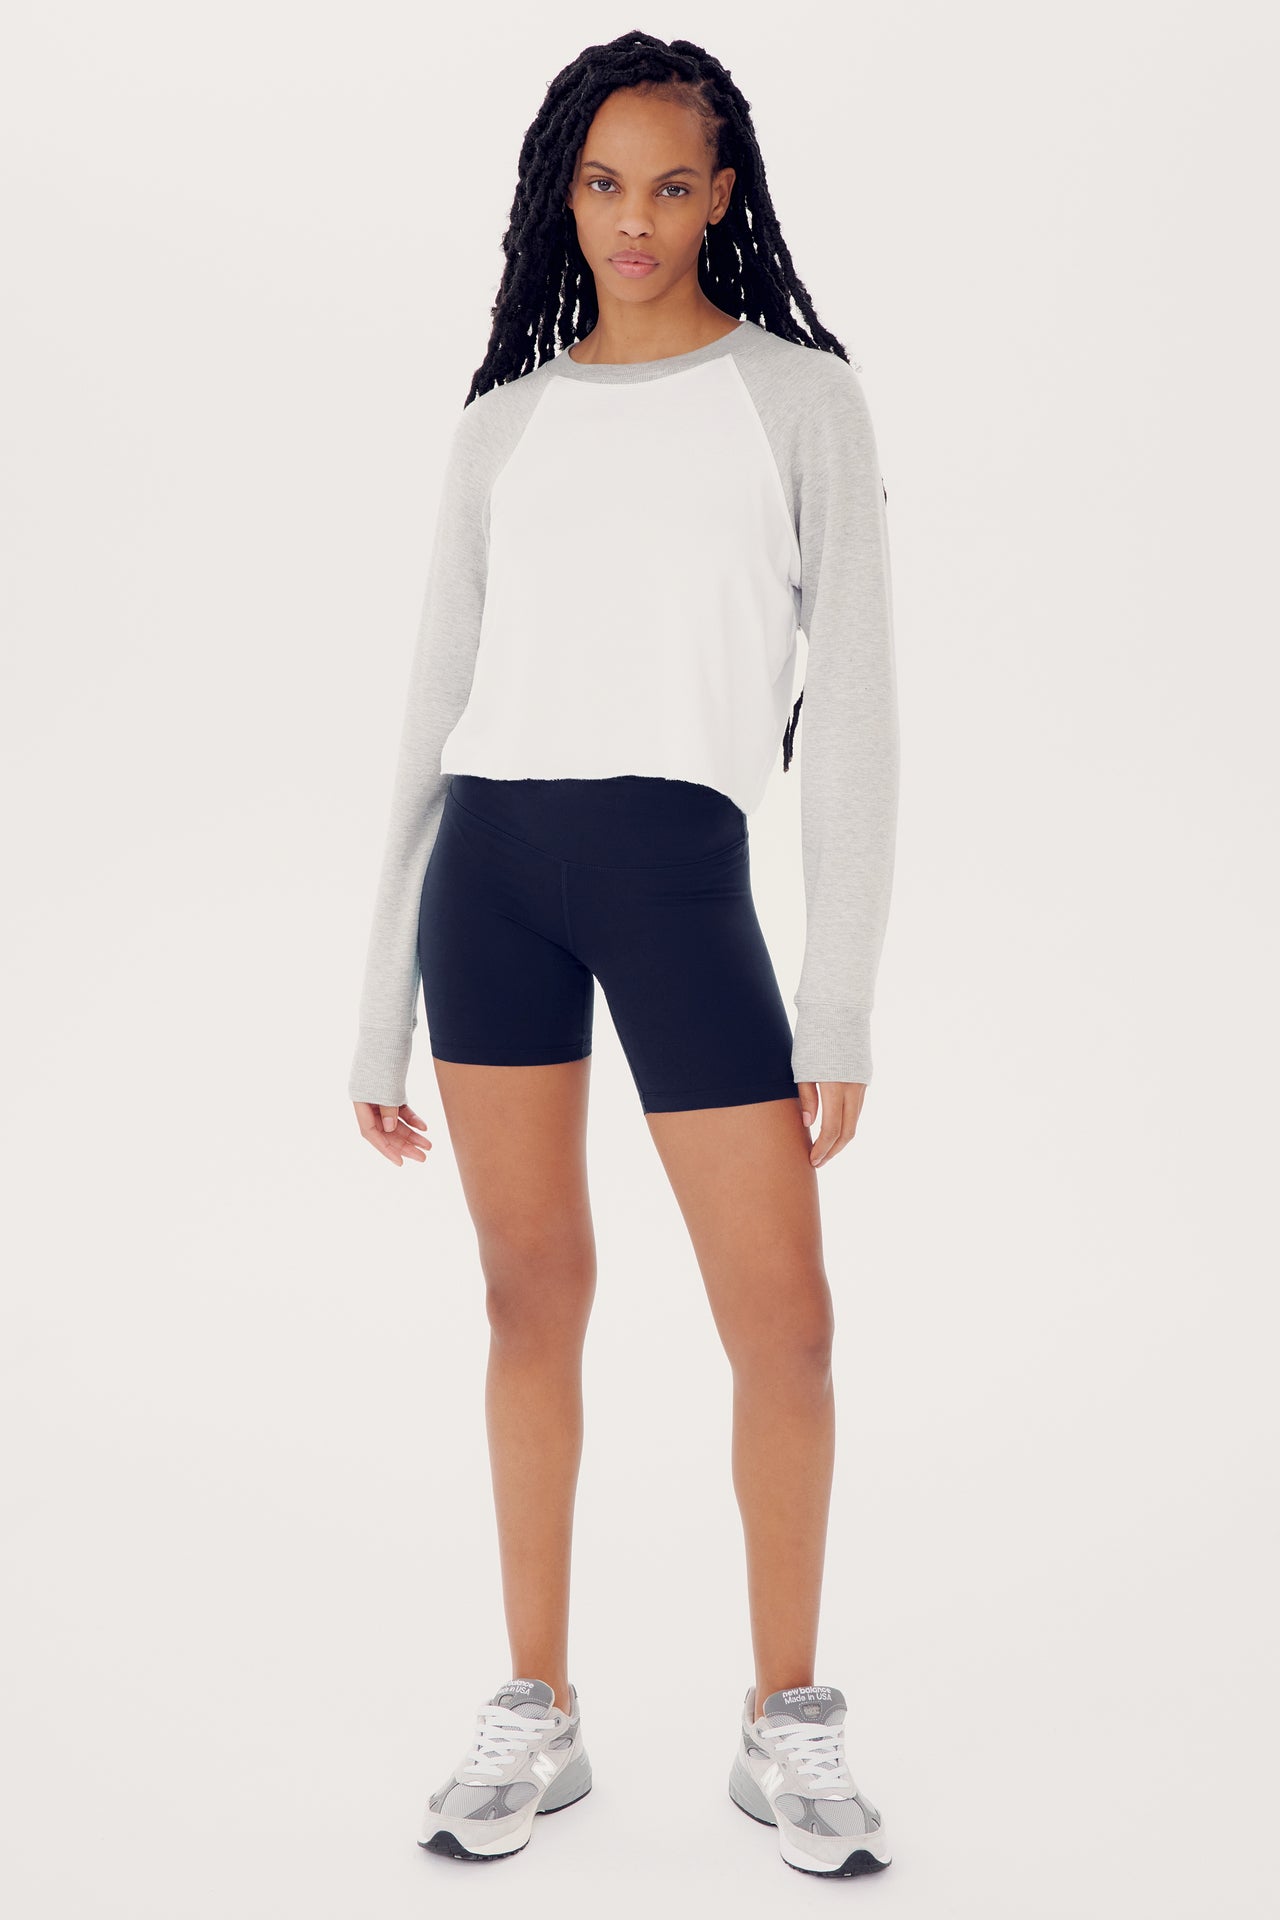 A woman in a Warm Up Crop Fleece Sweatshirt by SPLITS59 made of comfort fabric and black spandex shorts standing confidently, viewed against a plain white backdrop.